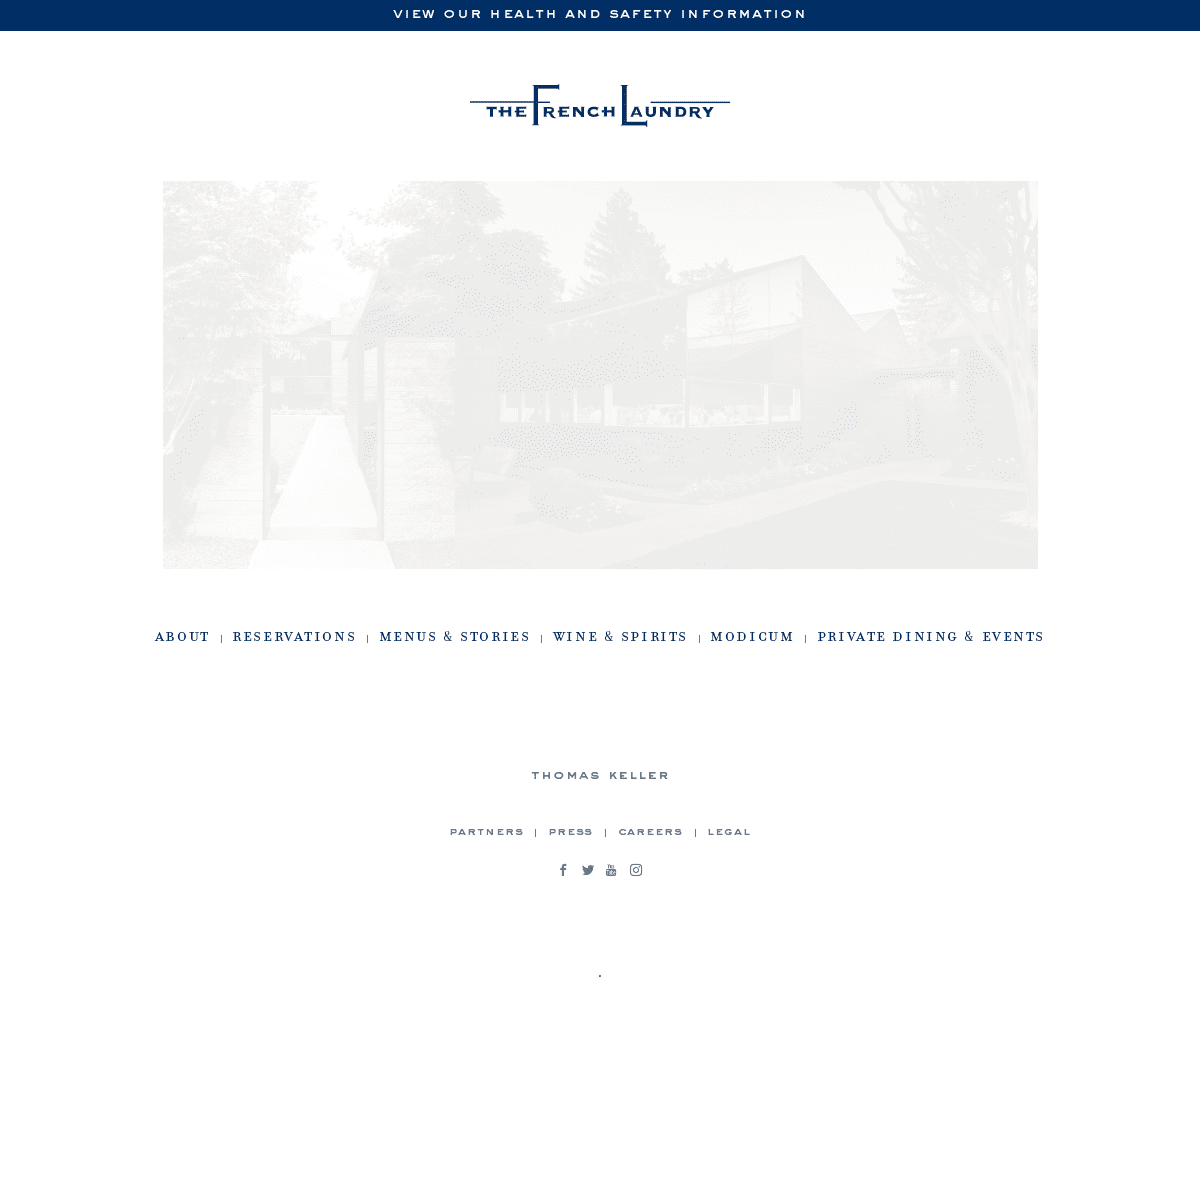 A complete backup of frenchlaundry.com